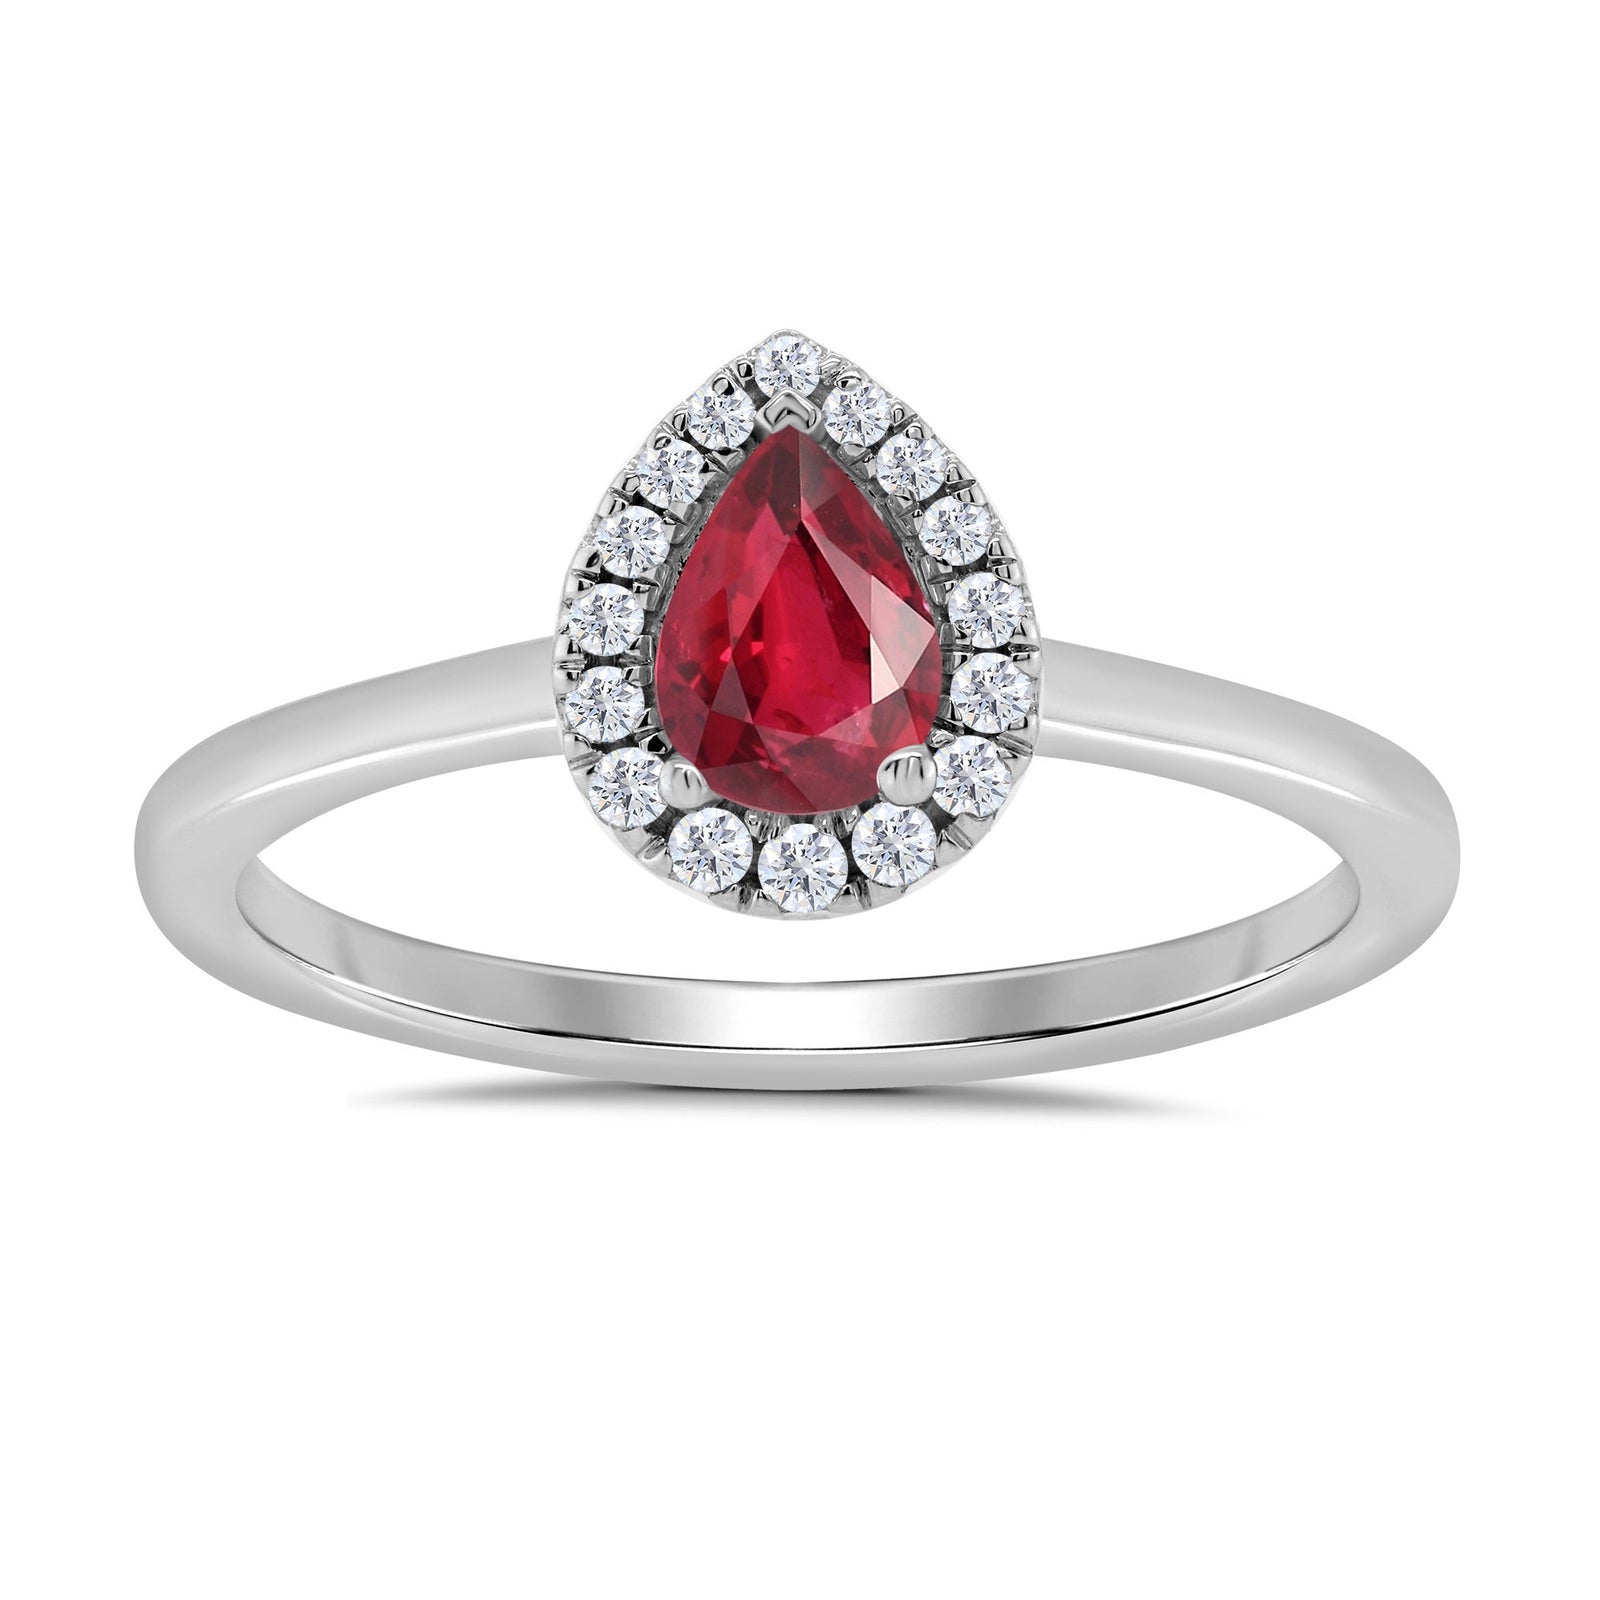 9ct white gold 6x4mm pear shape ruby & diamond cluster ring  0.10ct